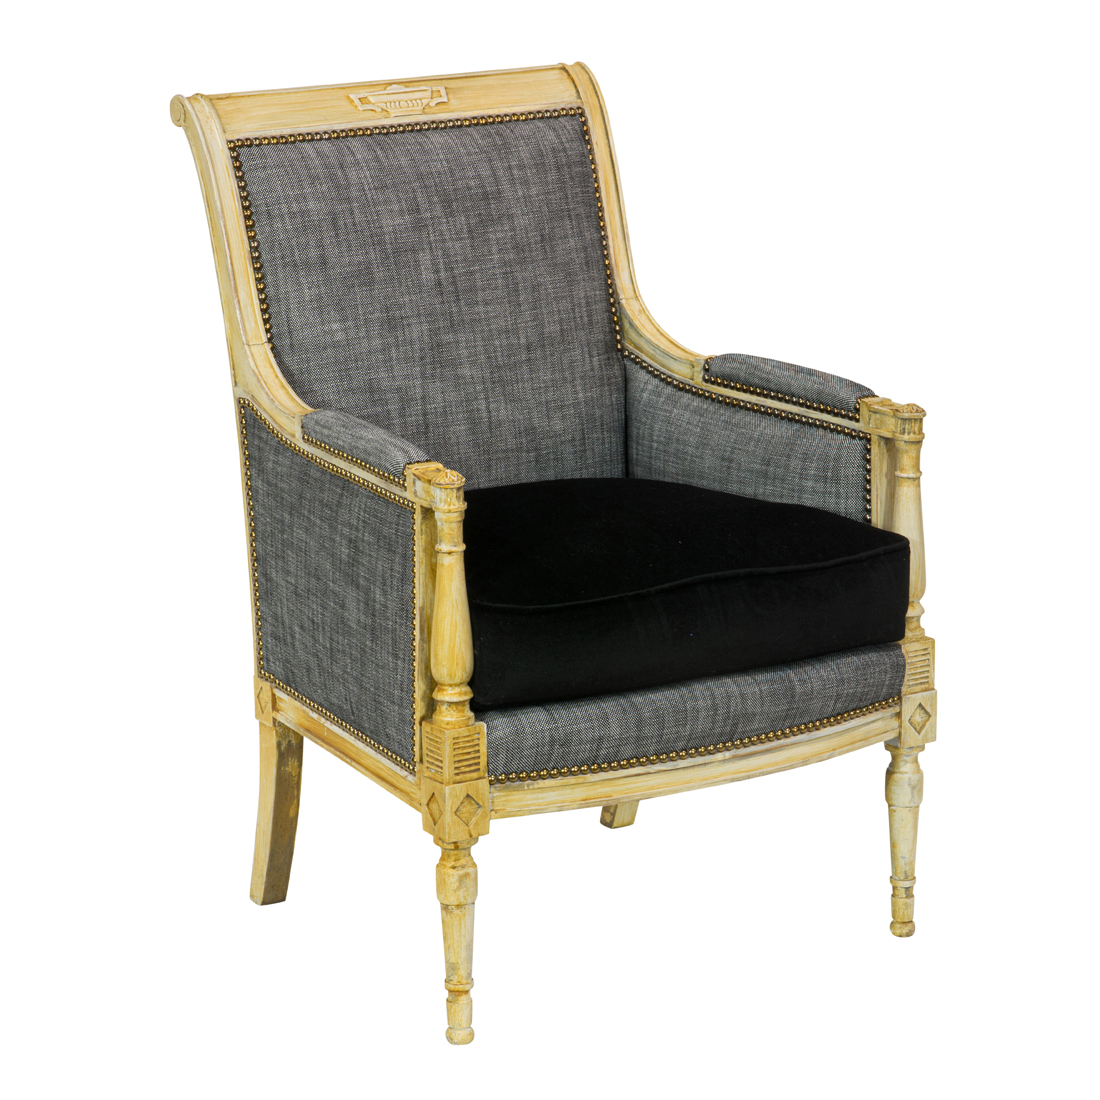 A NEOCLASSICAL STYLE PAINTED BERGERE 3cda5d